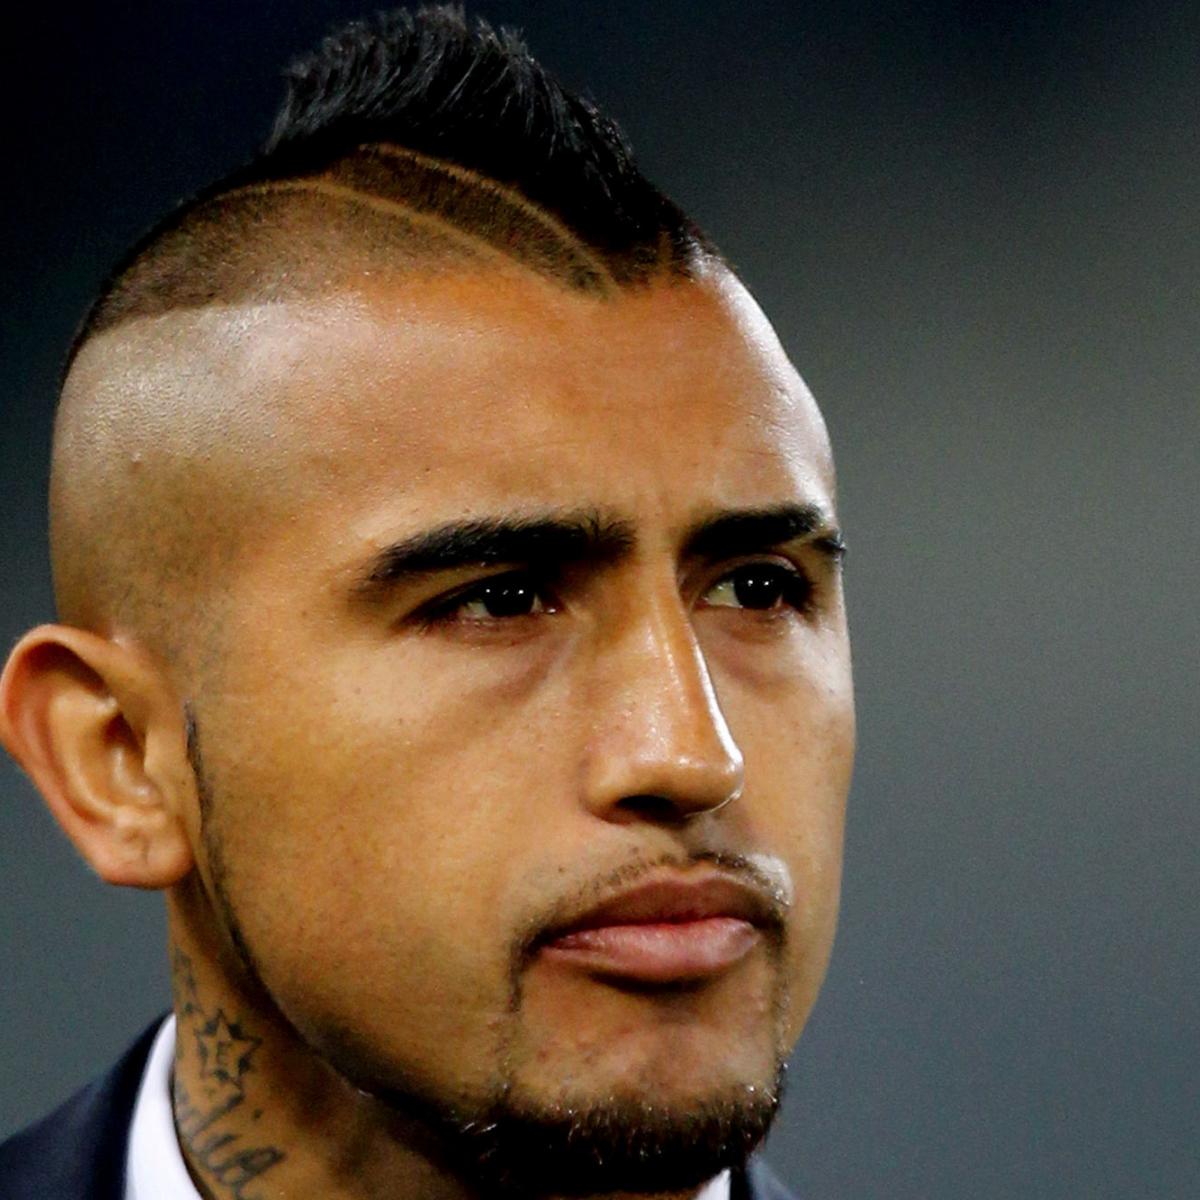 Manchester United Transfer News Arturo Vidal Exit Rumours Grow in 